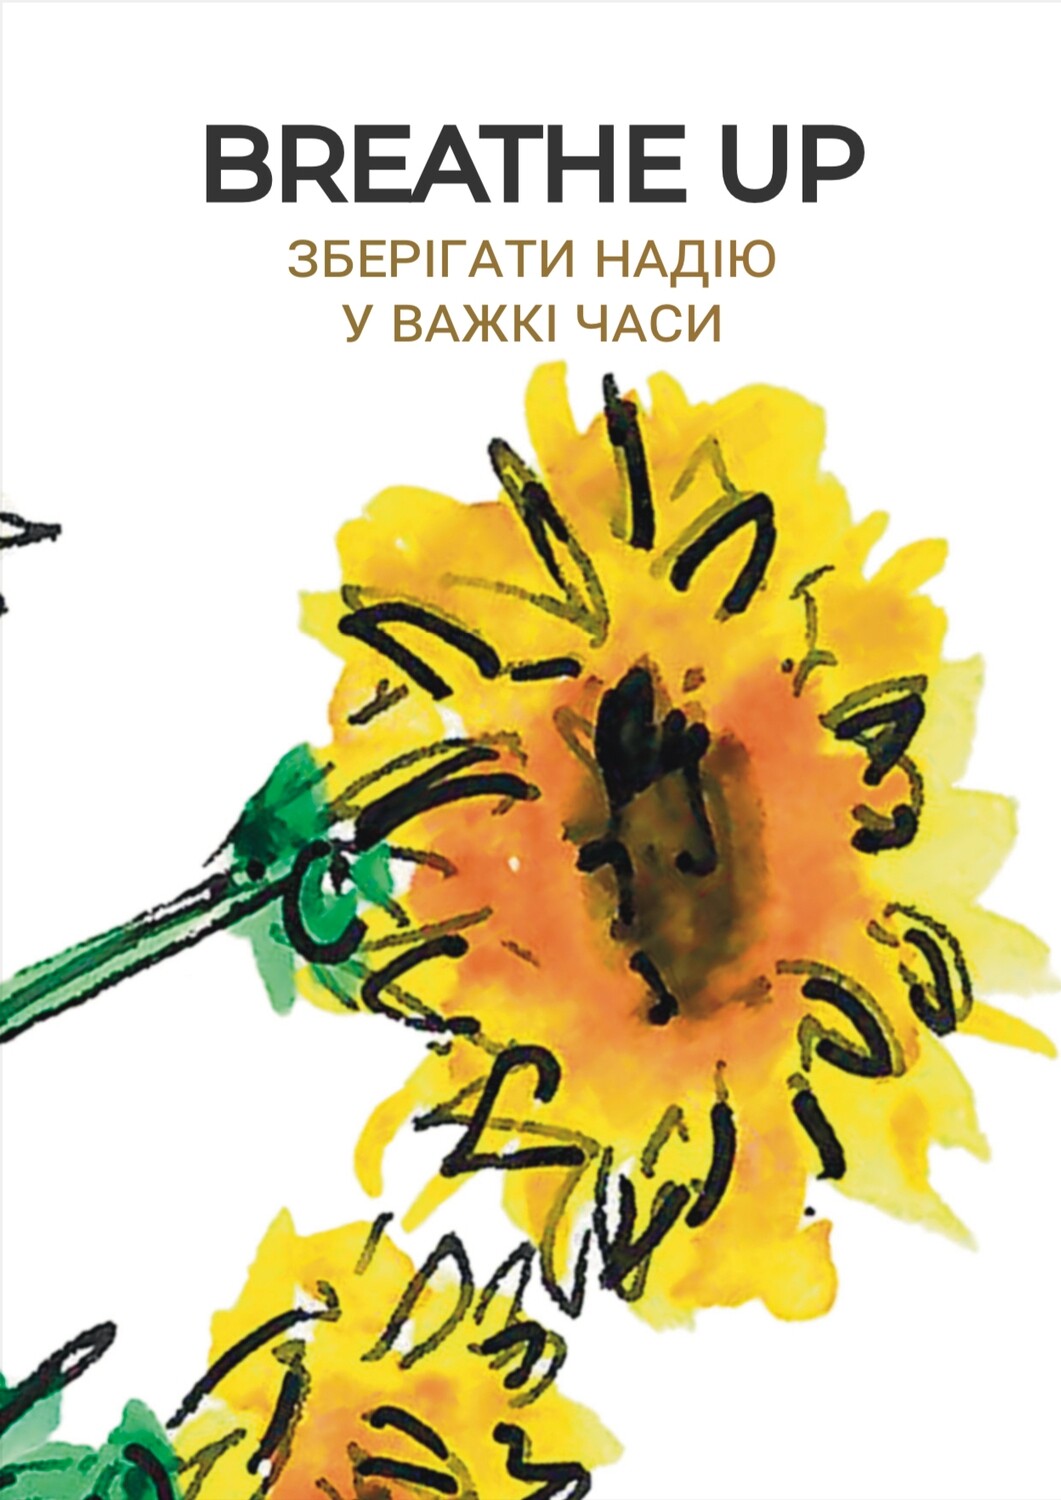 Booklet „Breathe Up - Keeping hope in tough times“